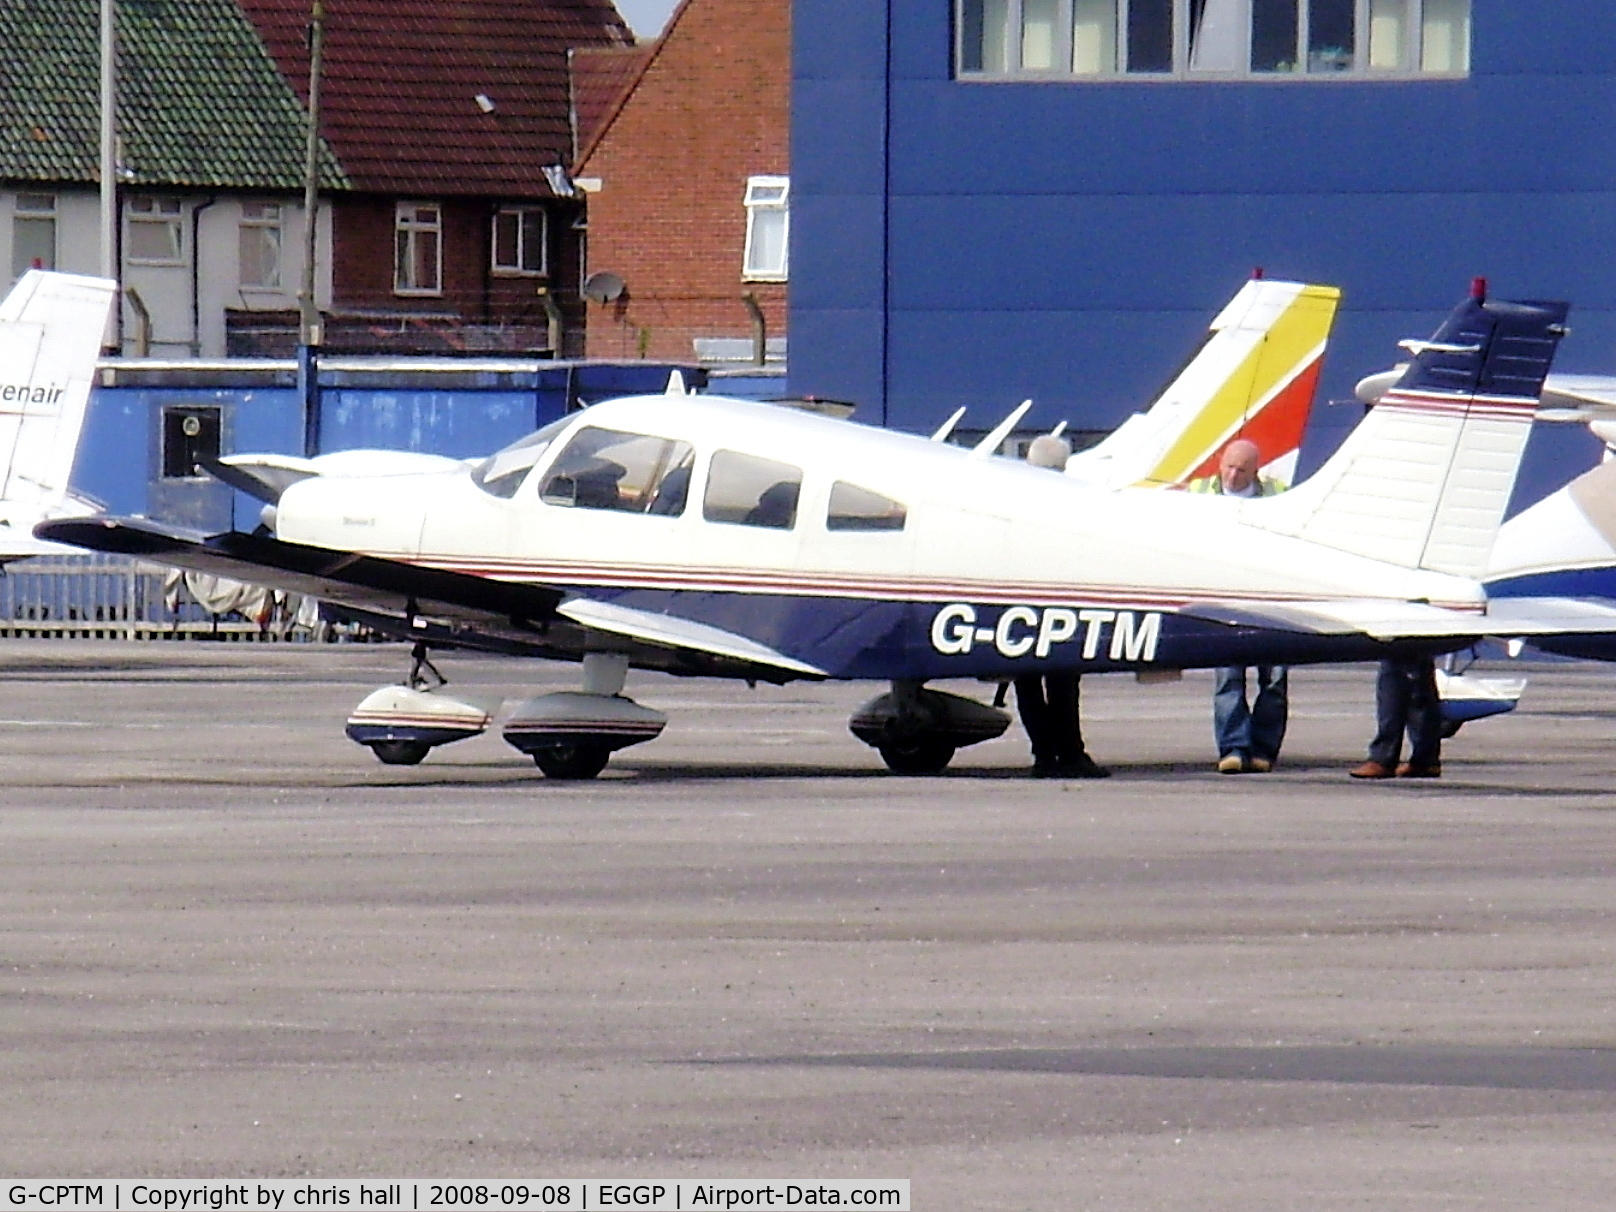 G-CPTM, 1977 Piper PA-28-151 Cherokee Warrior C/N 28-7715012, private